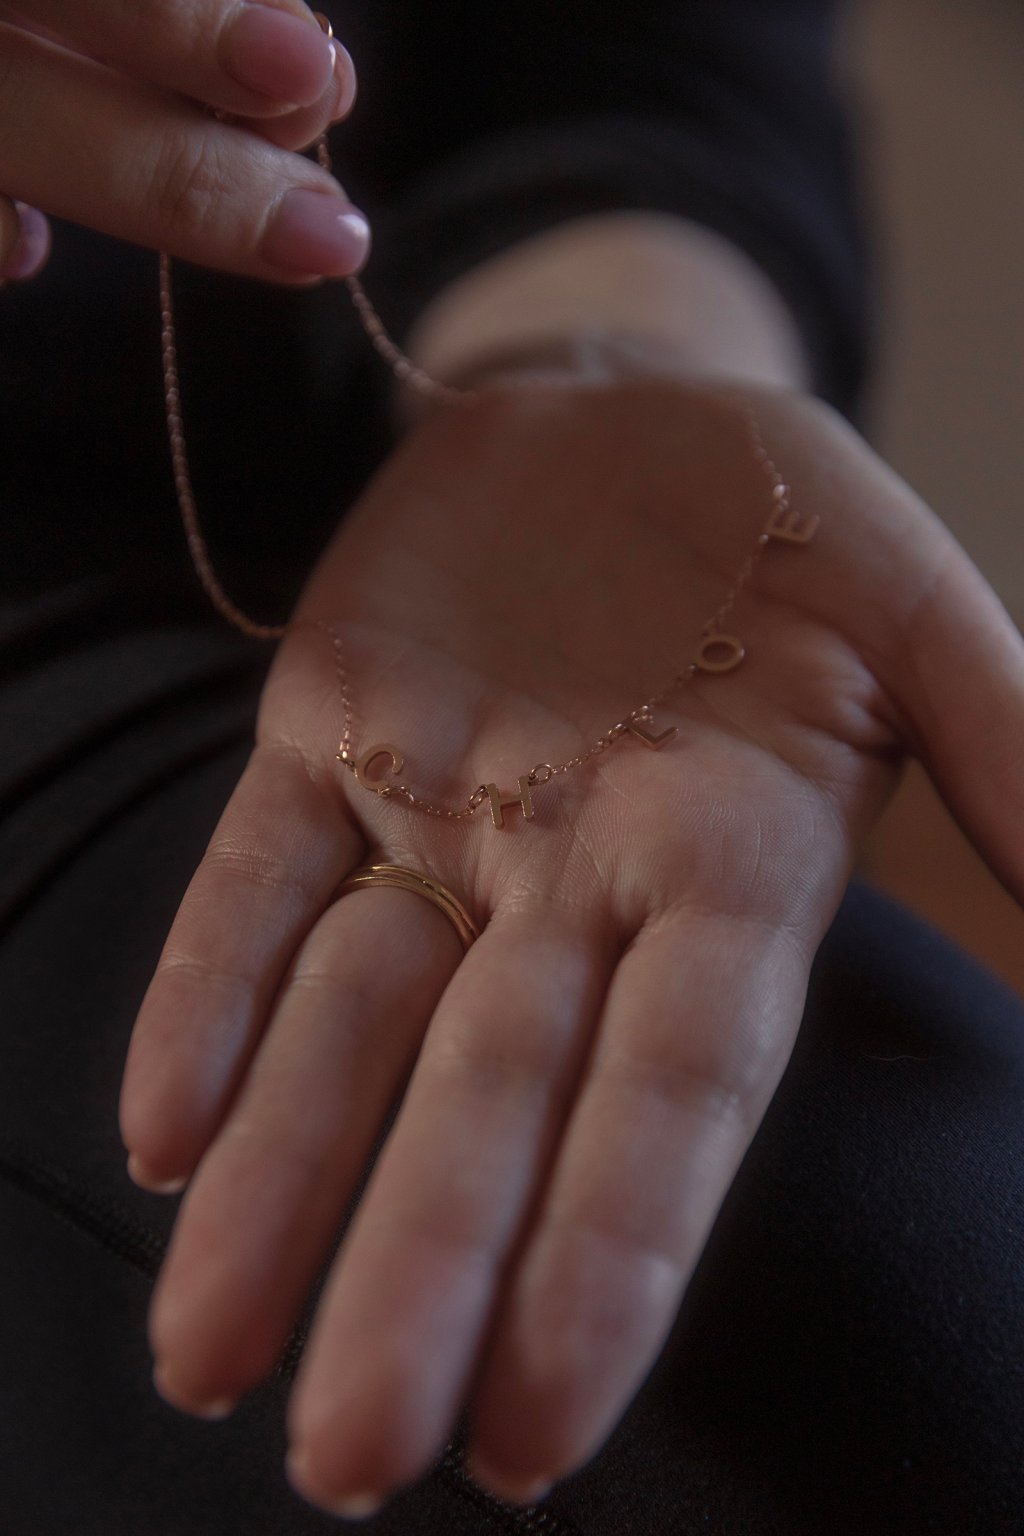 Before terminating the pregnancy, Kate and Justin named the baby Chloe. Kate was gifted this necklace by a friend after she had the abortion.